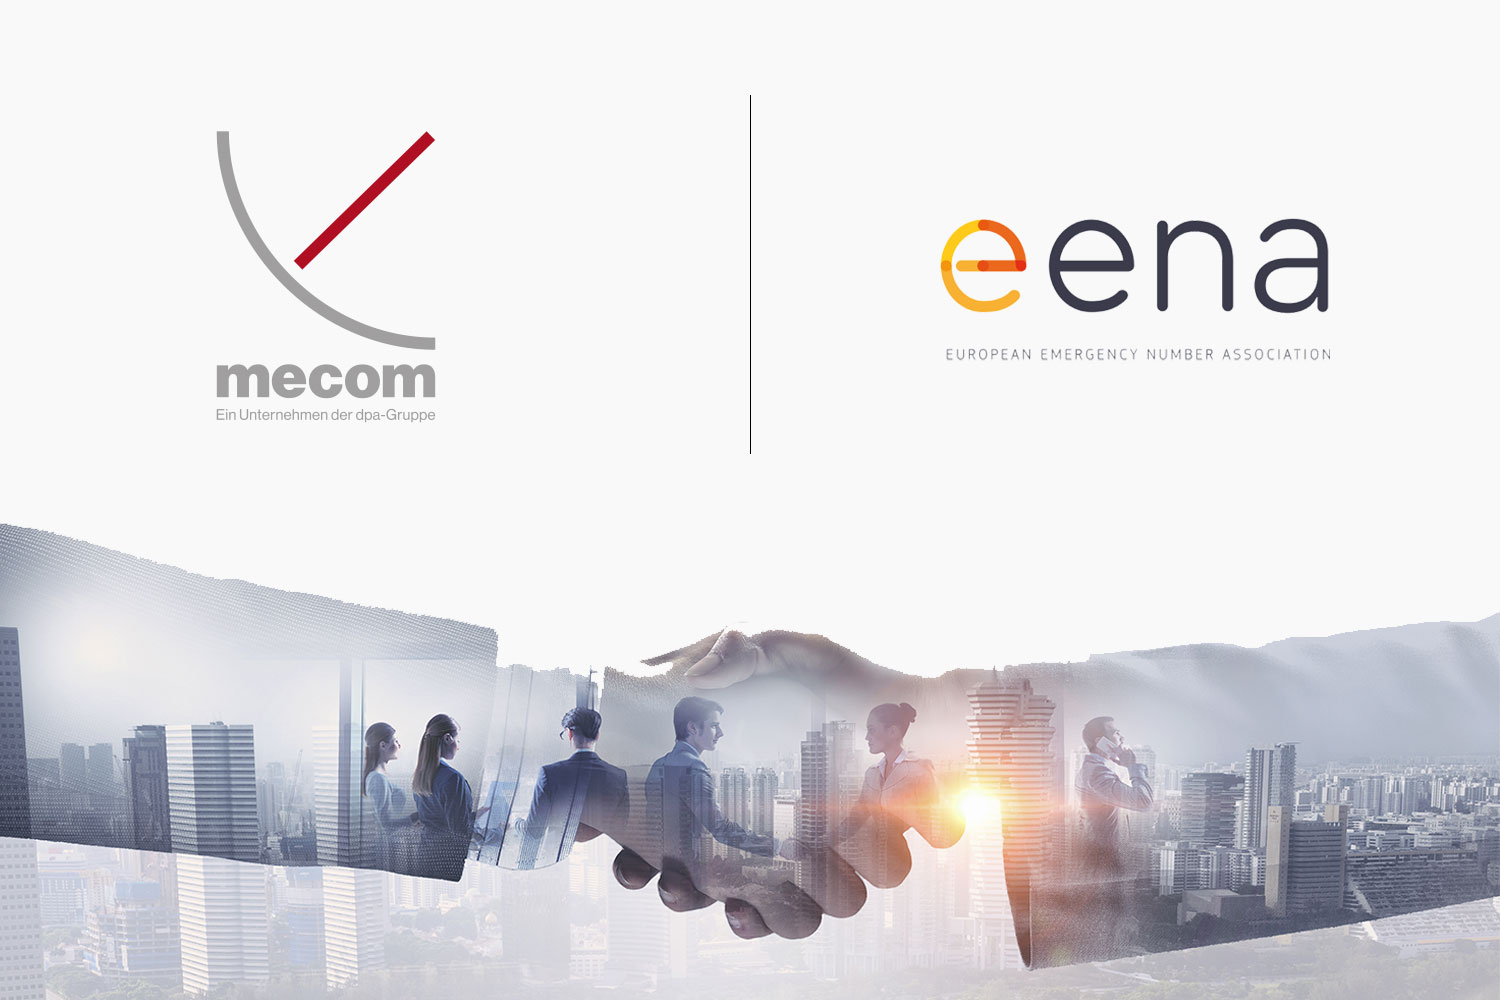 mecom a new member of the non-profit European Emergency Number Association (EENA) in charge of the European emergency number service 112